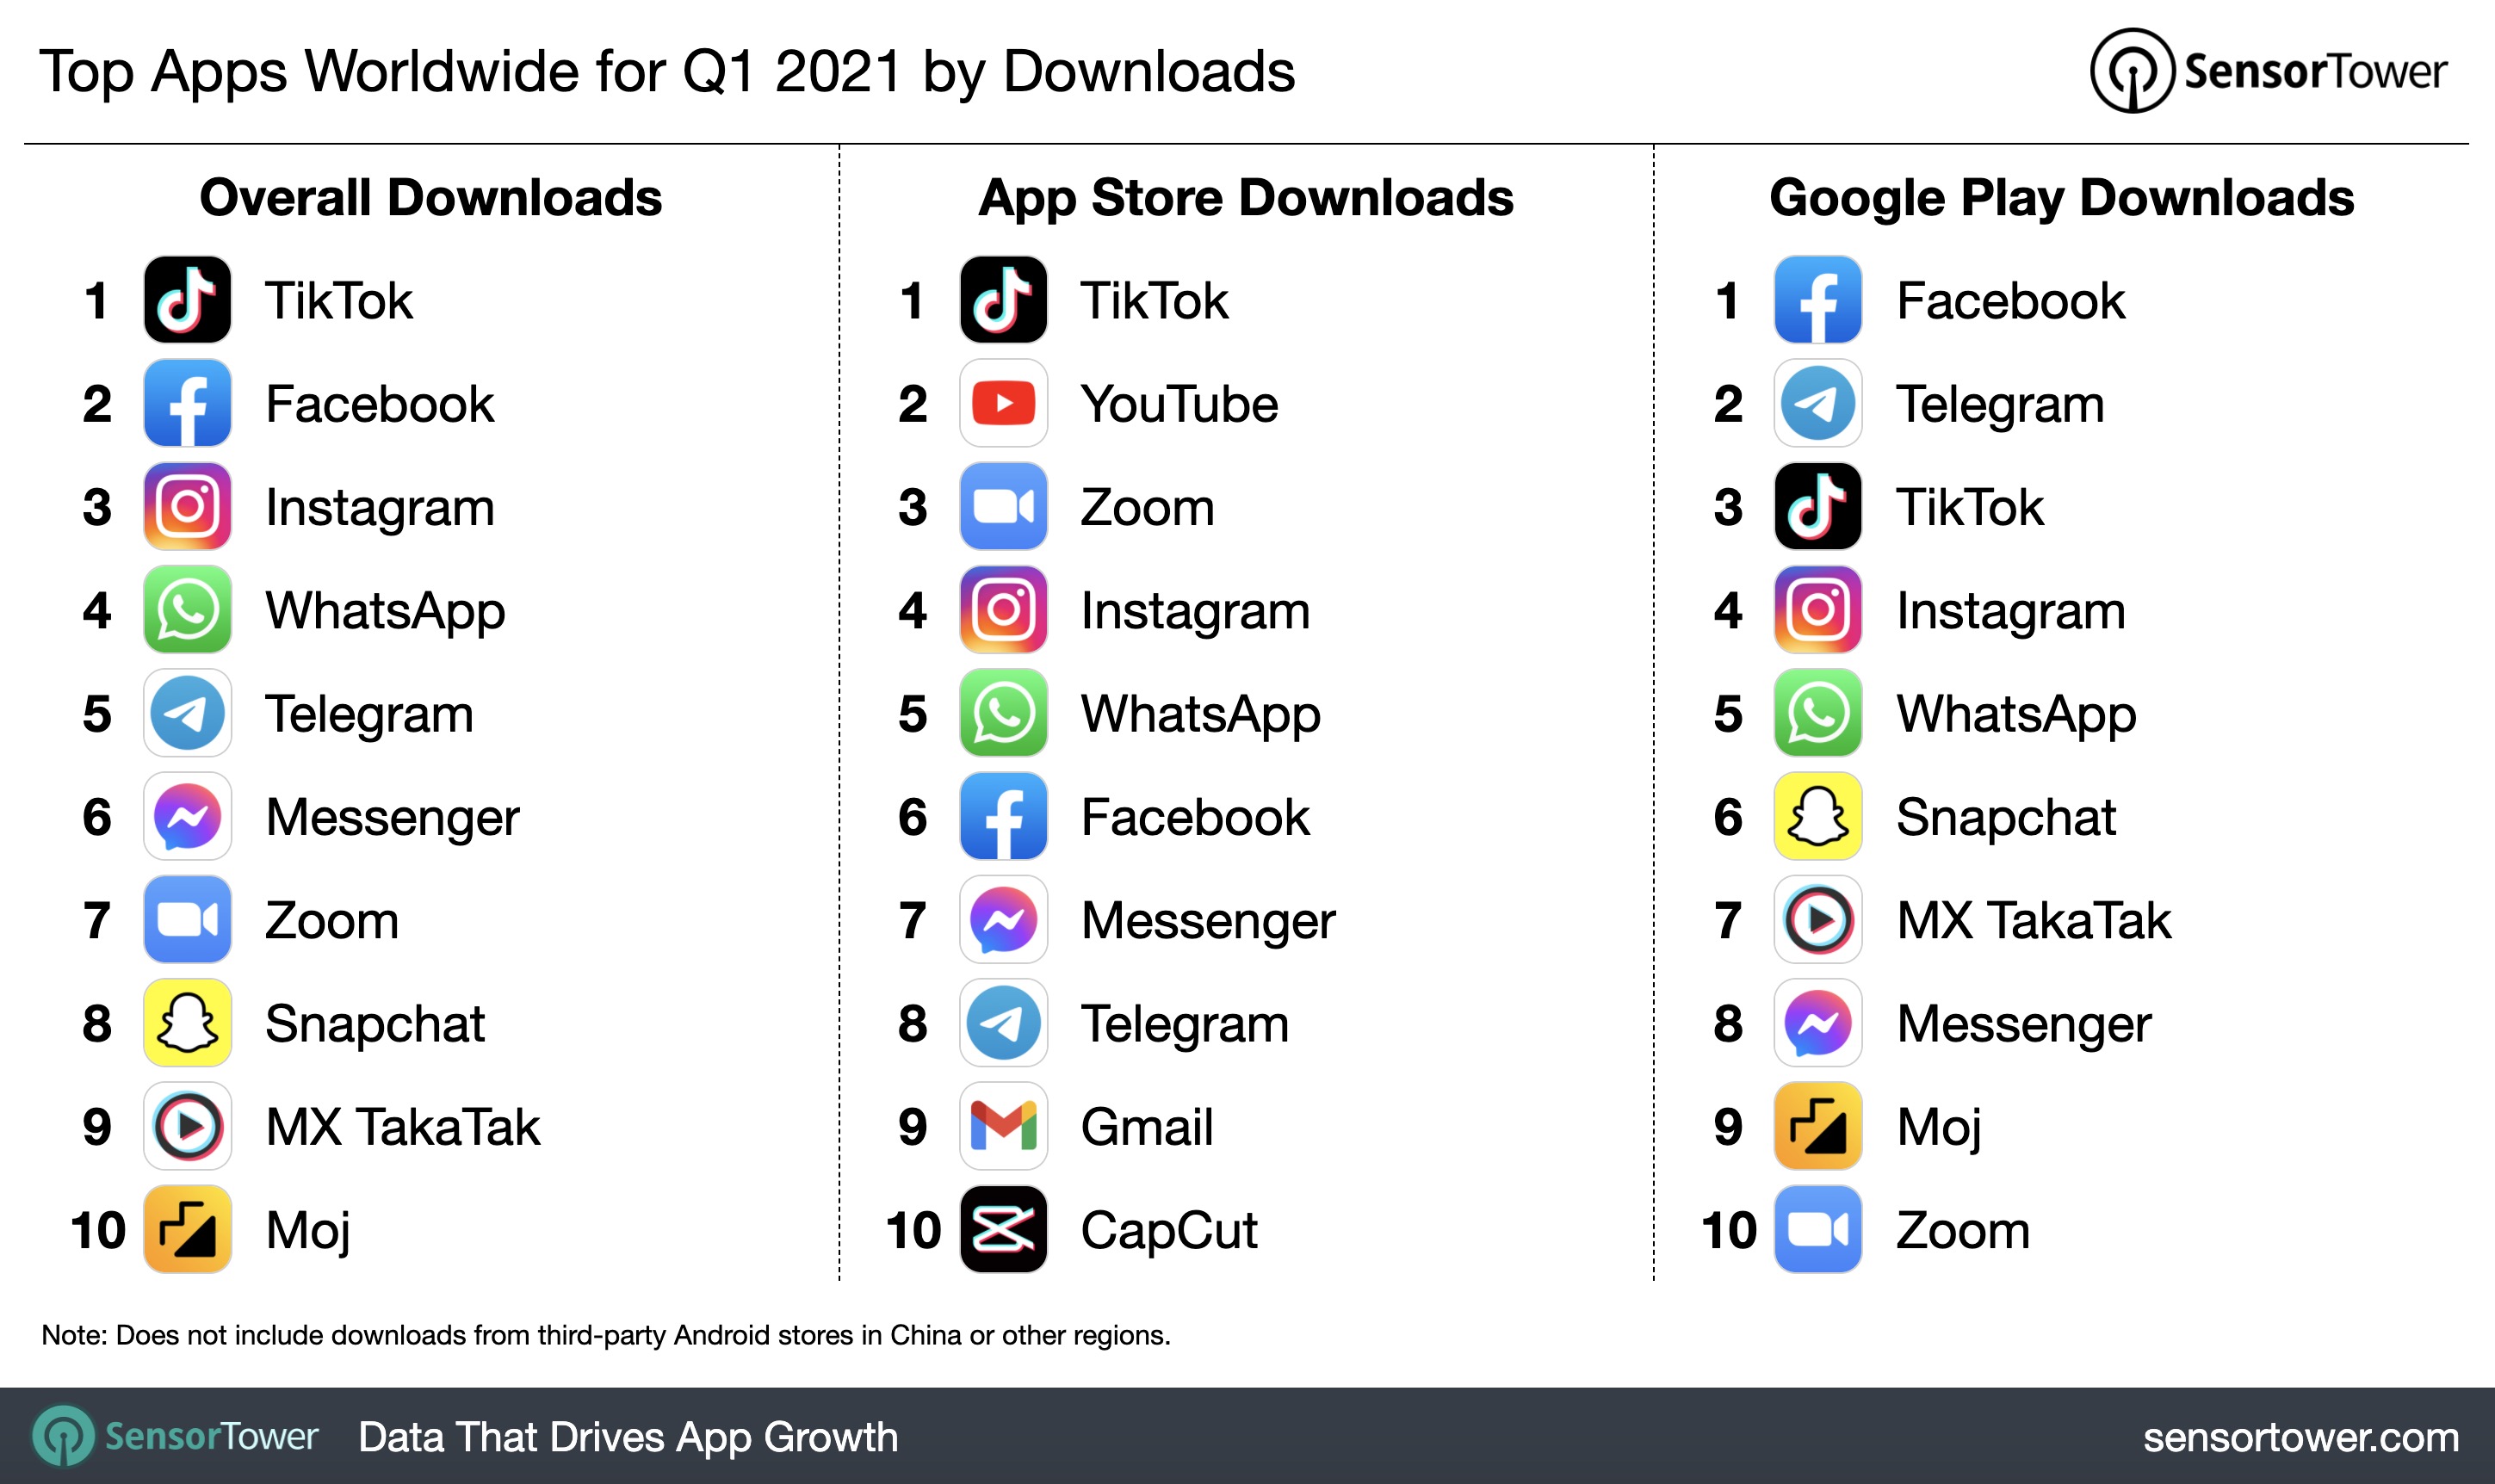 TikTok was the most downloaded app across both stores in 1Q21.